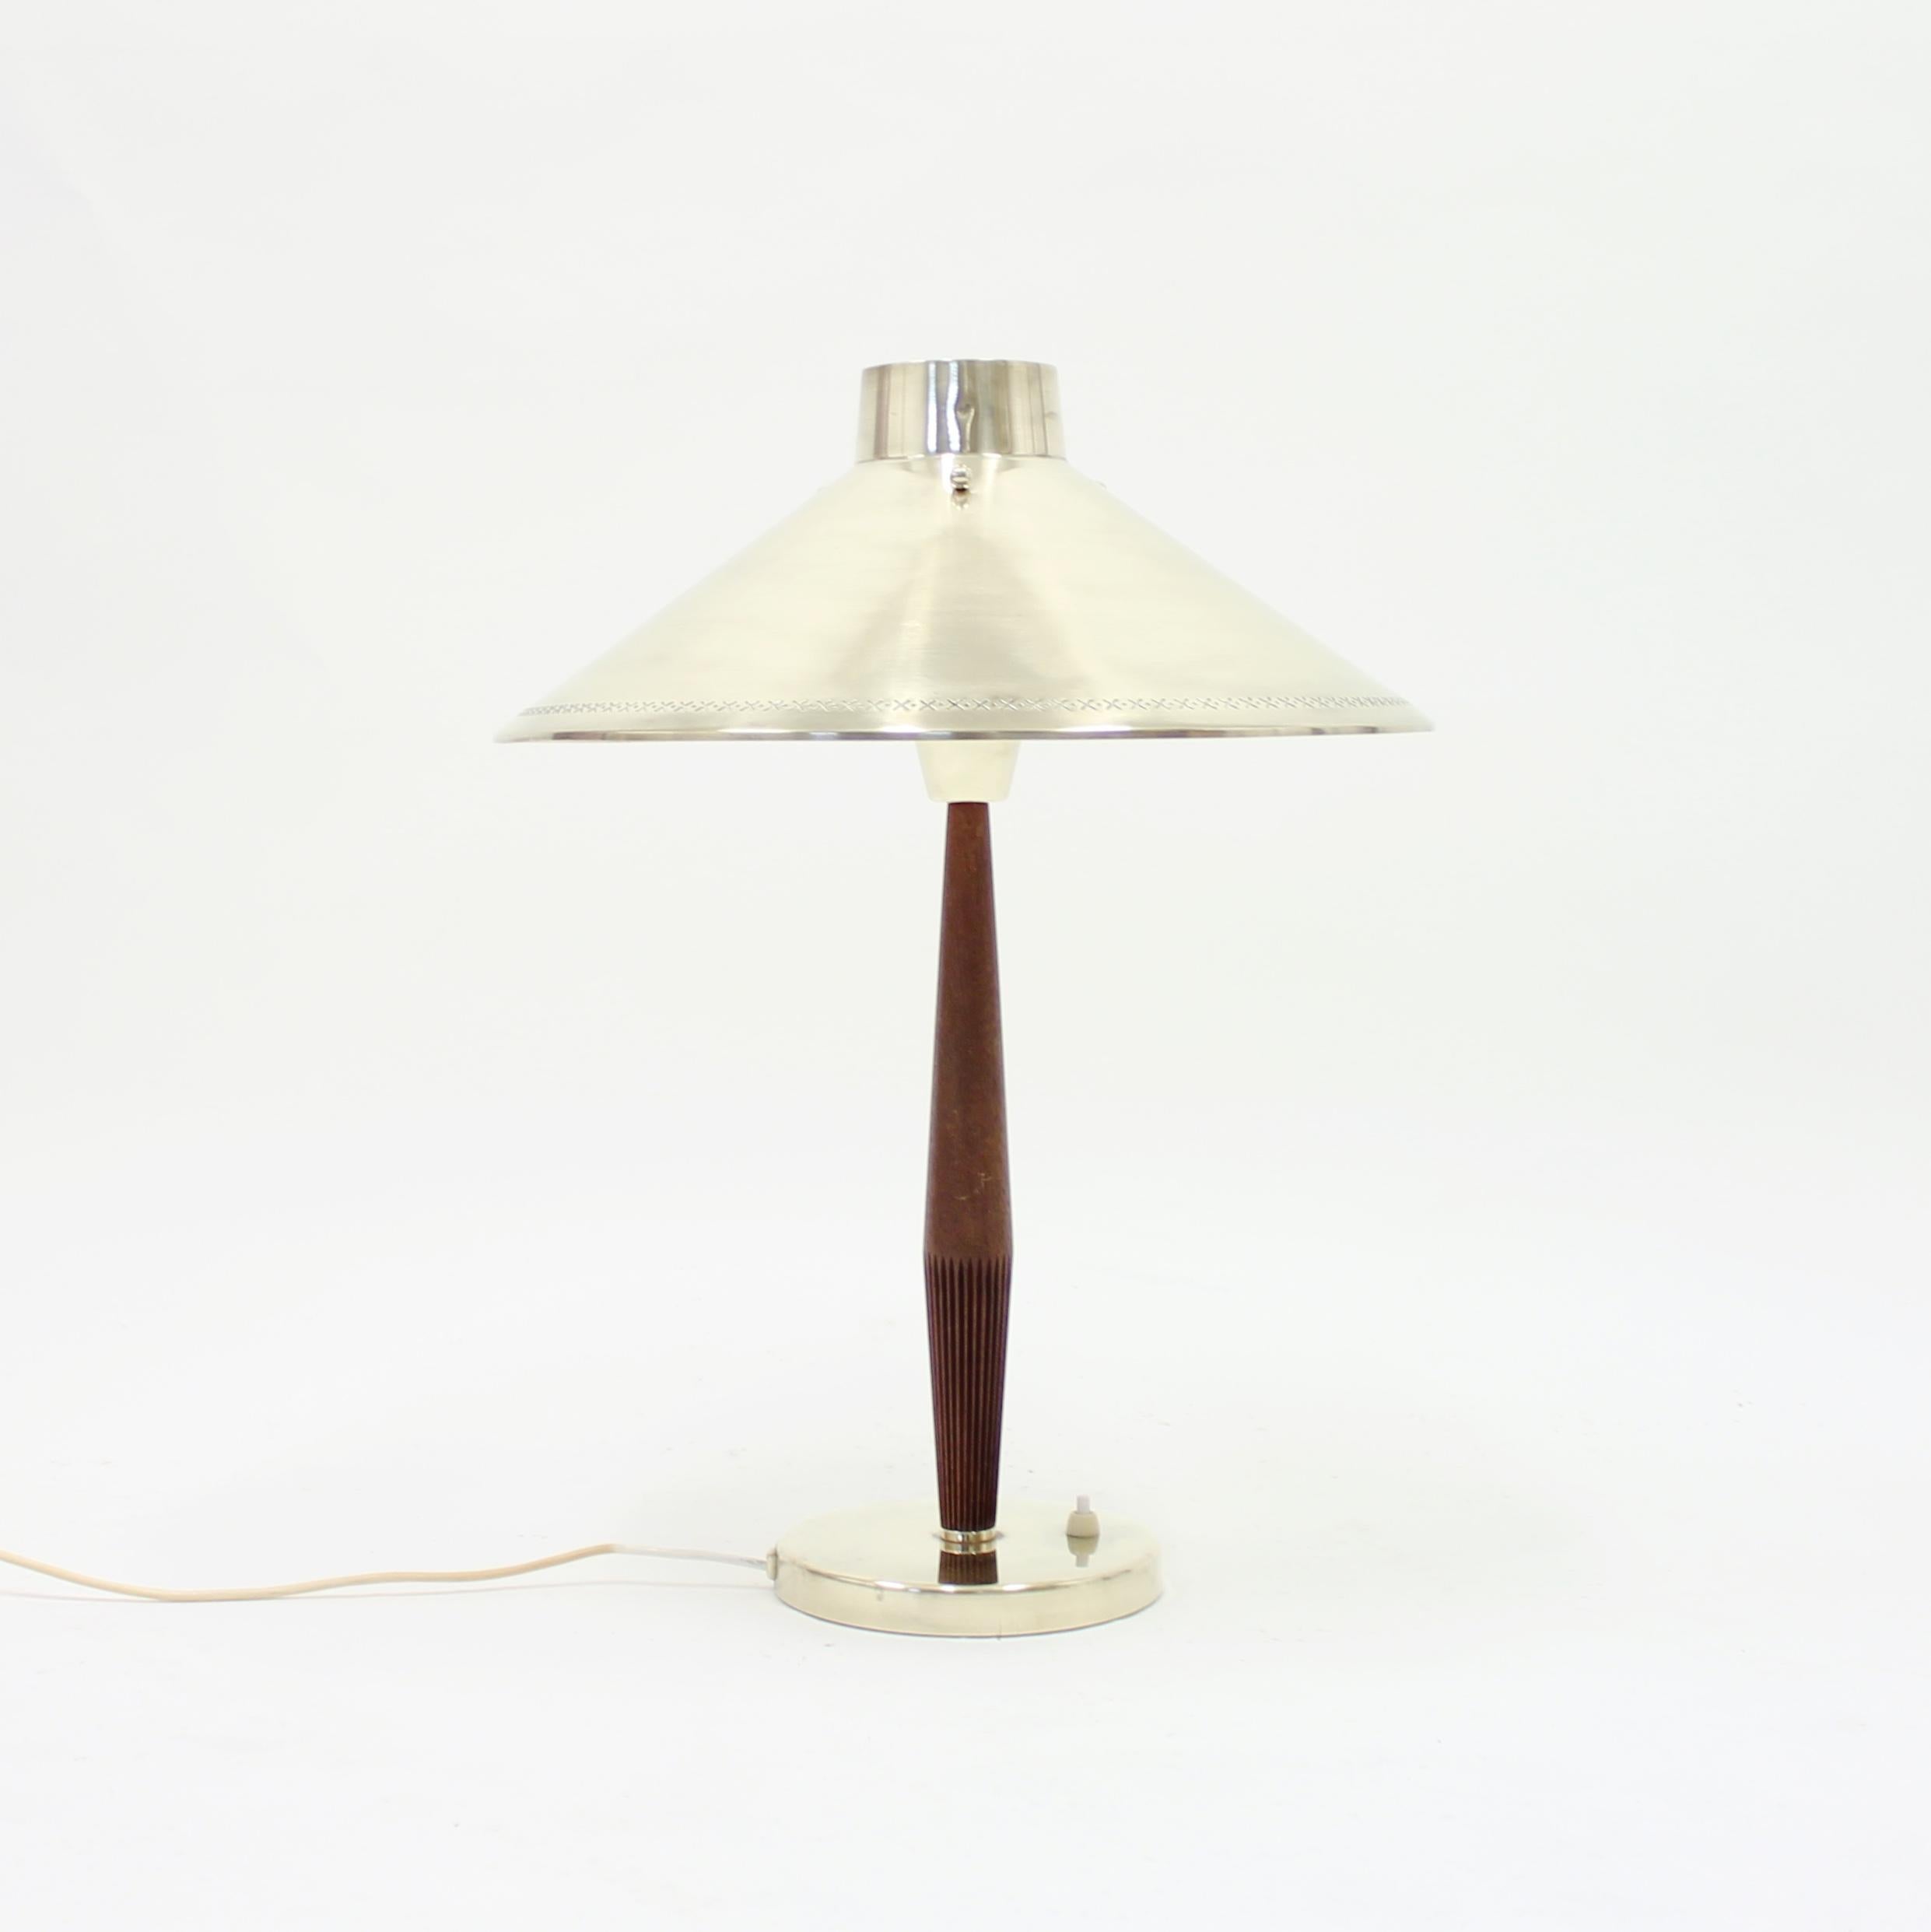 Teak and brass table lamp designed by Hans Bergström for ASEA in the 1950s. The shade is hold in place by three globe brass screws that sits on top of the shade as a decoration. Overall in a good vintage condition. All the brass has been polished